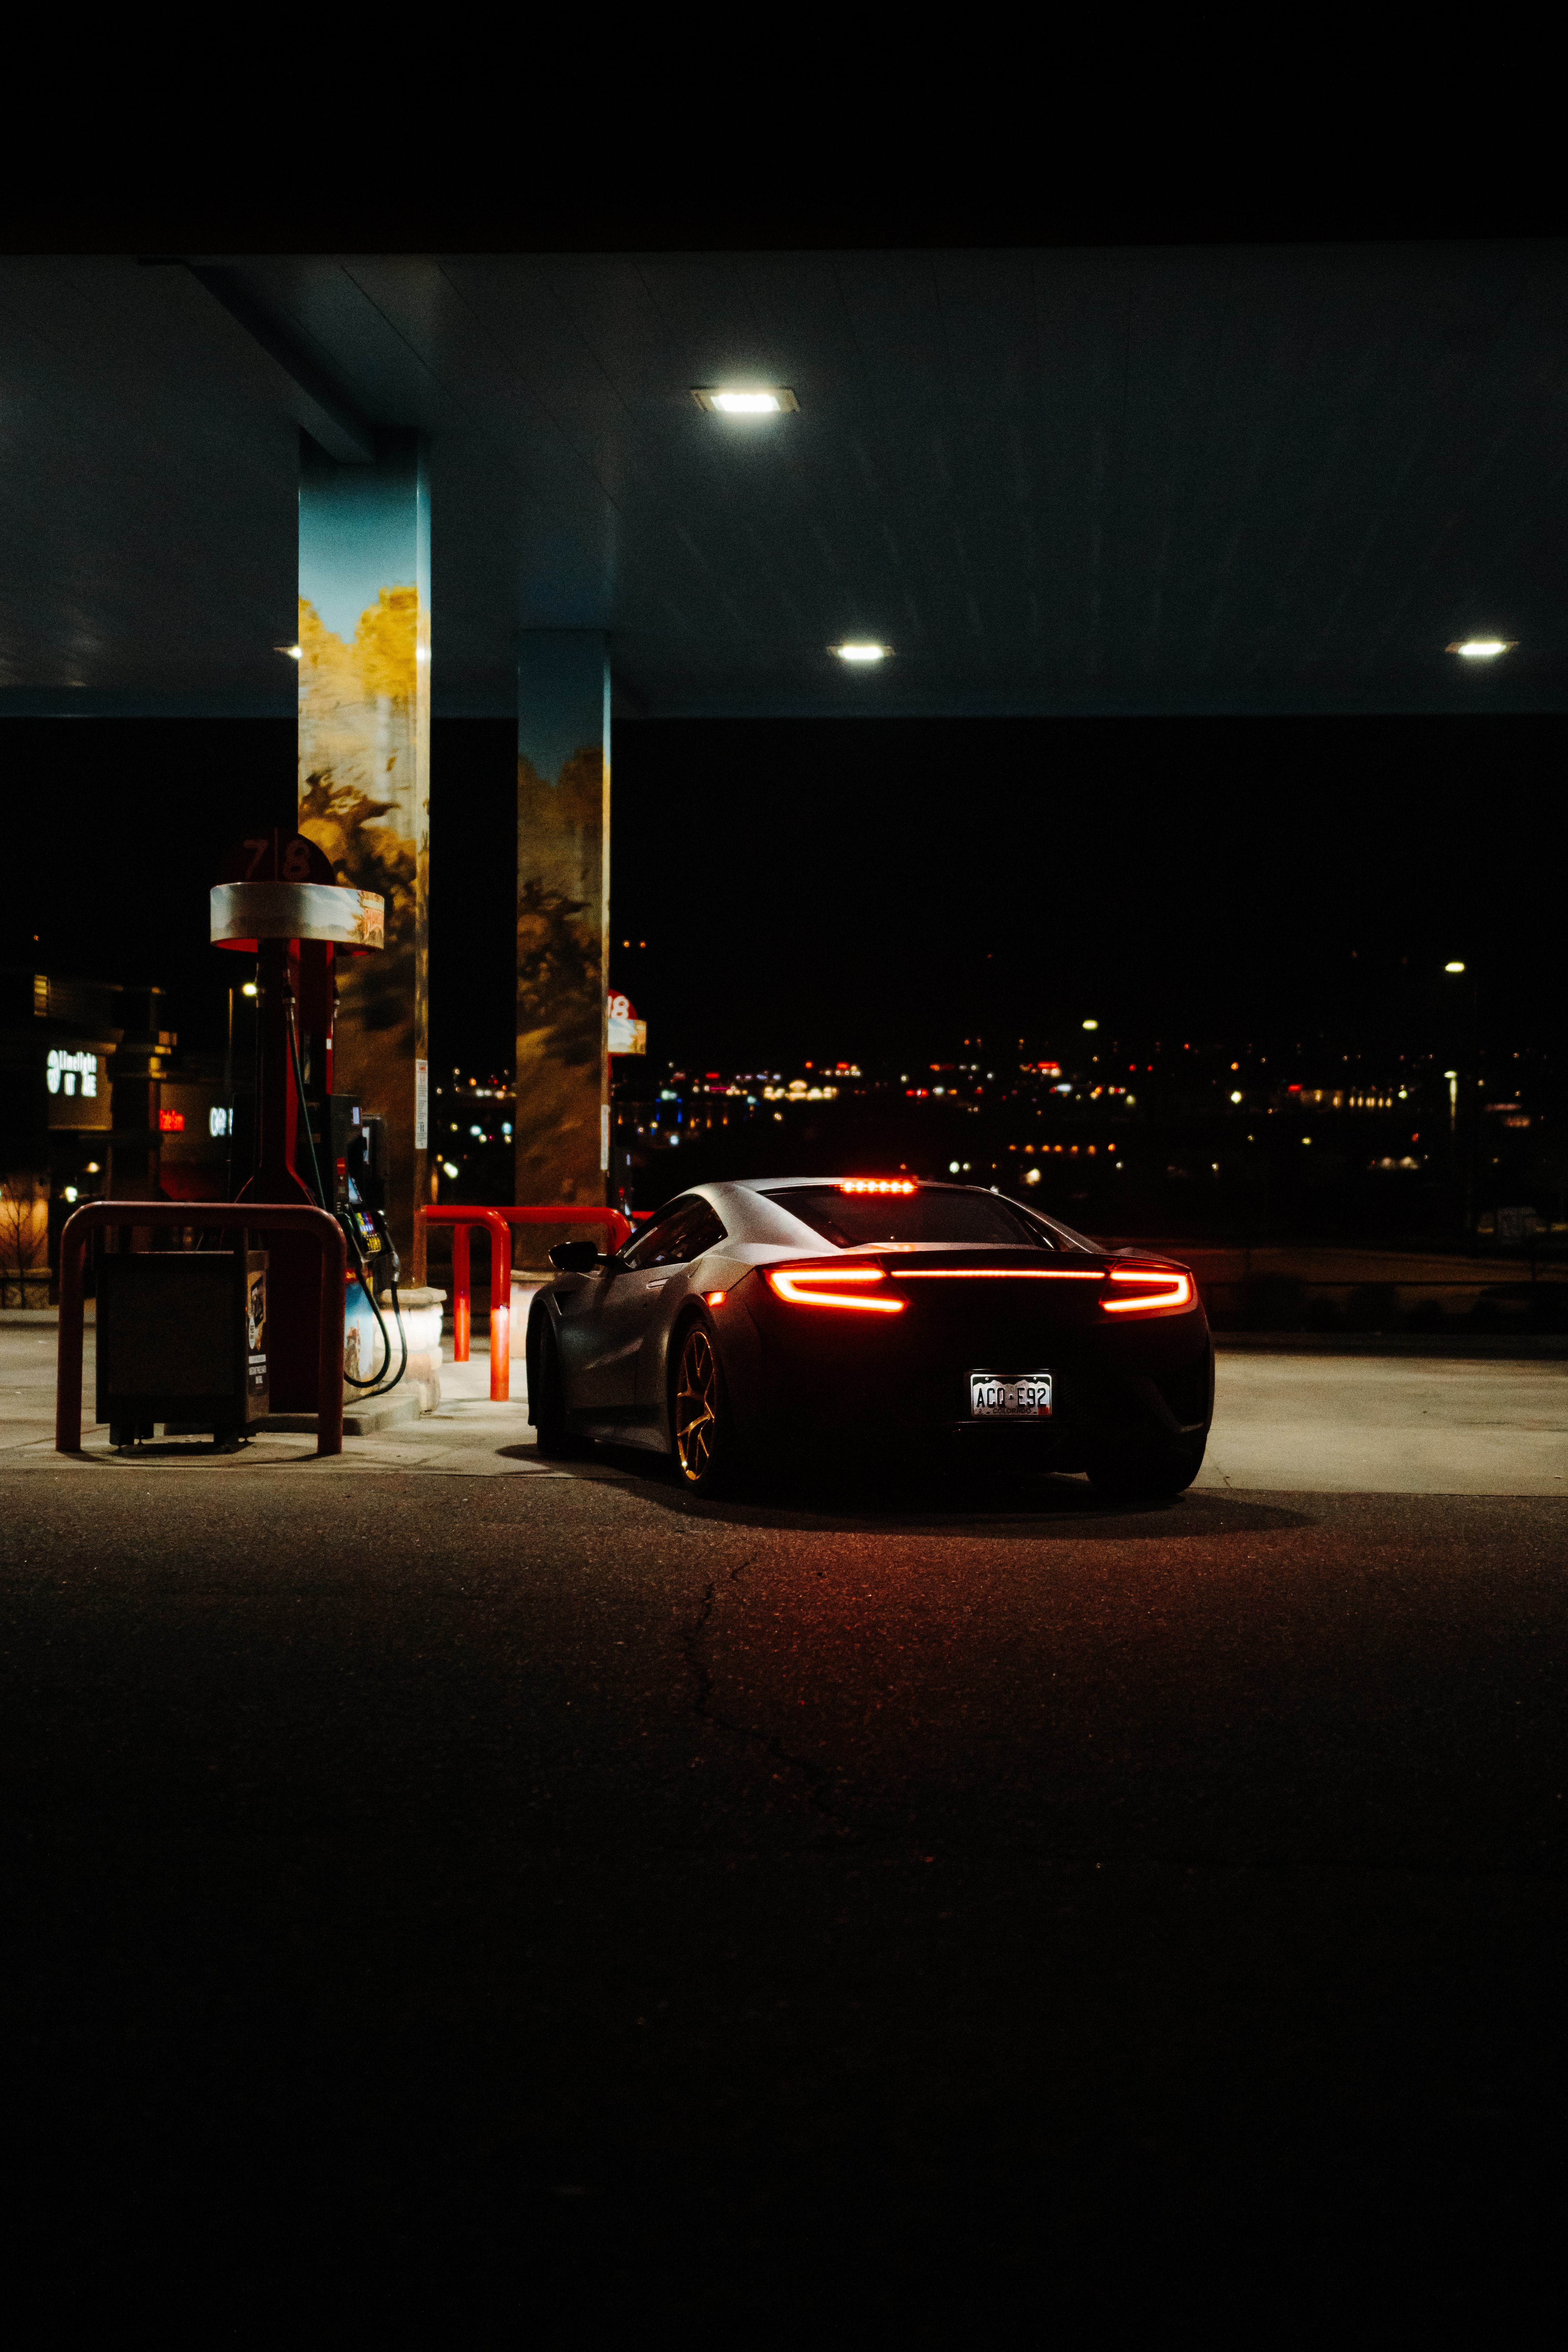 rear view, refueling, cars, filling, back view, lights, car, lanterns, black for android